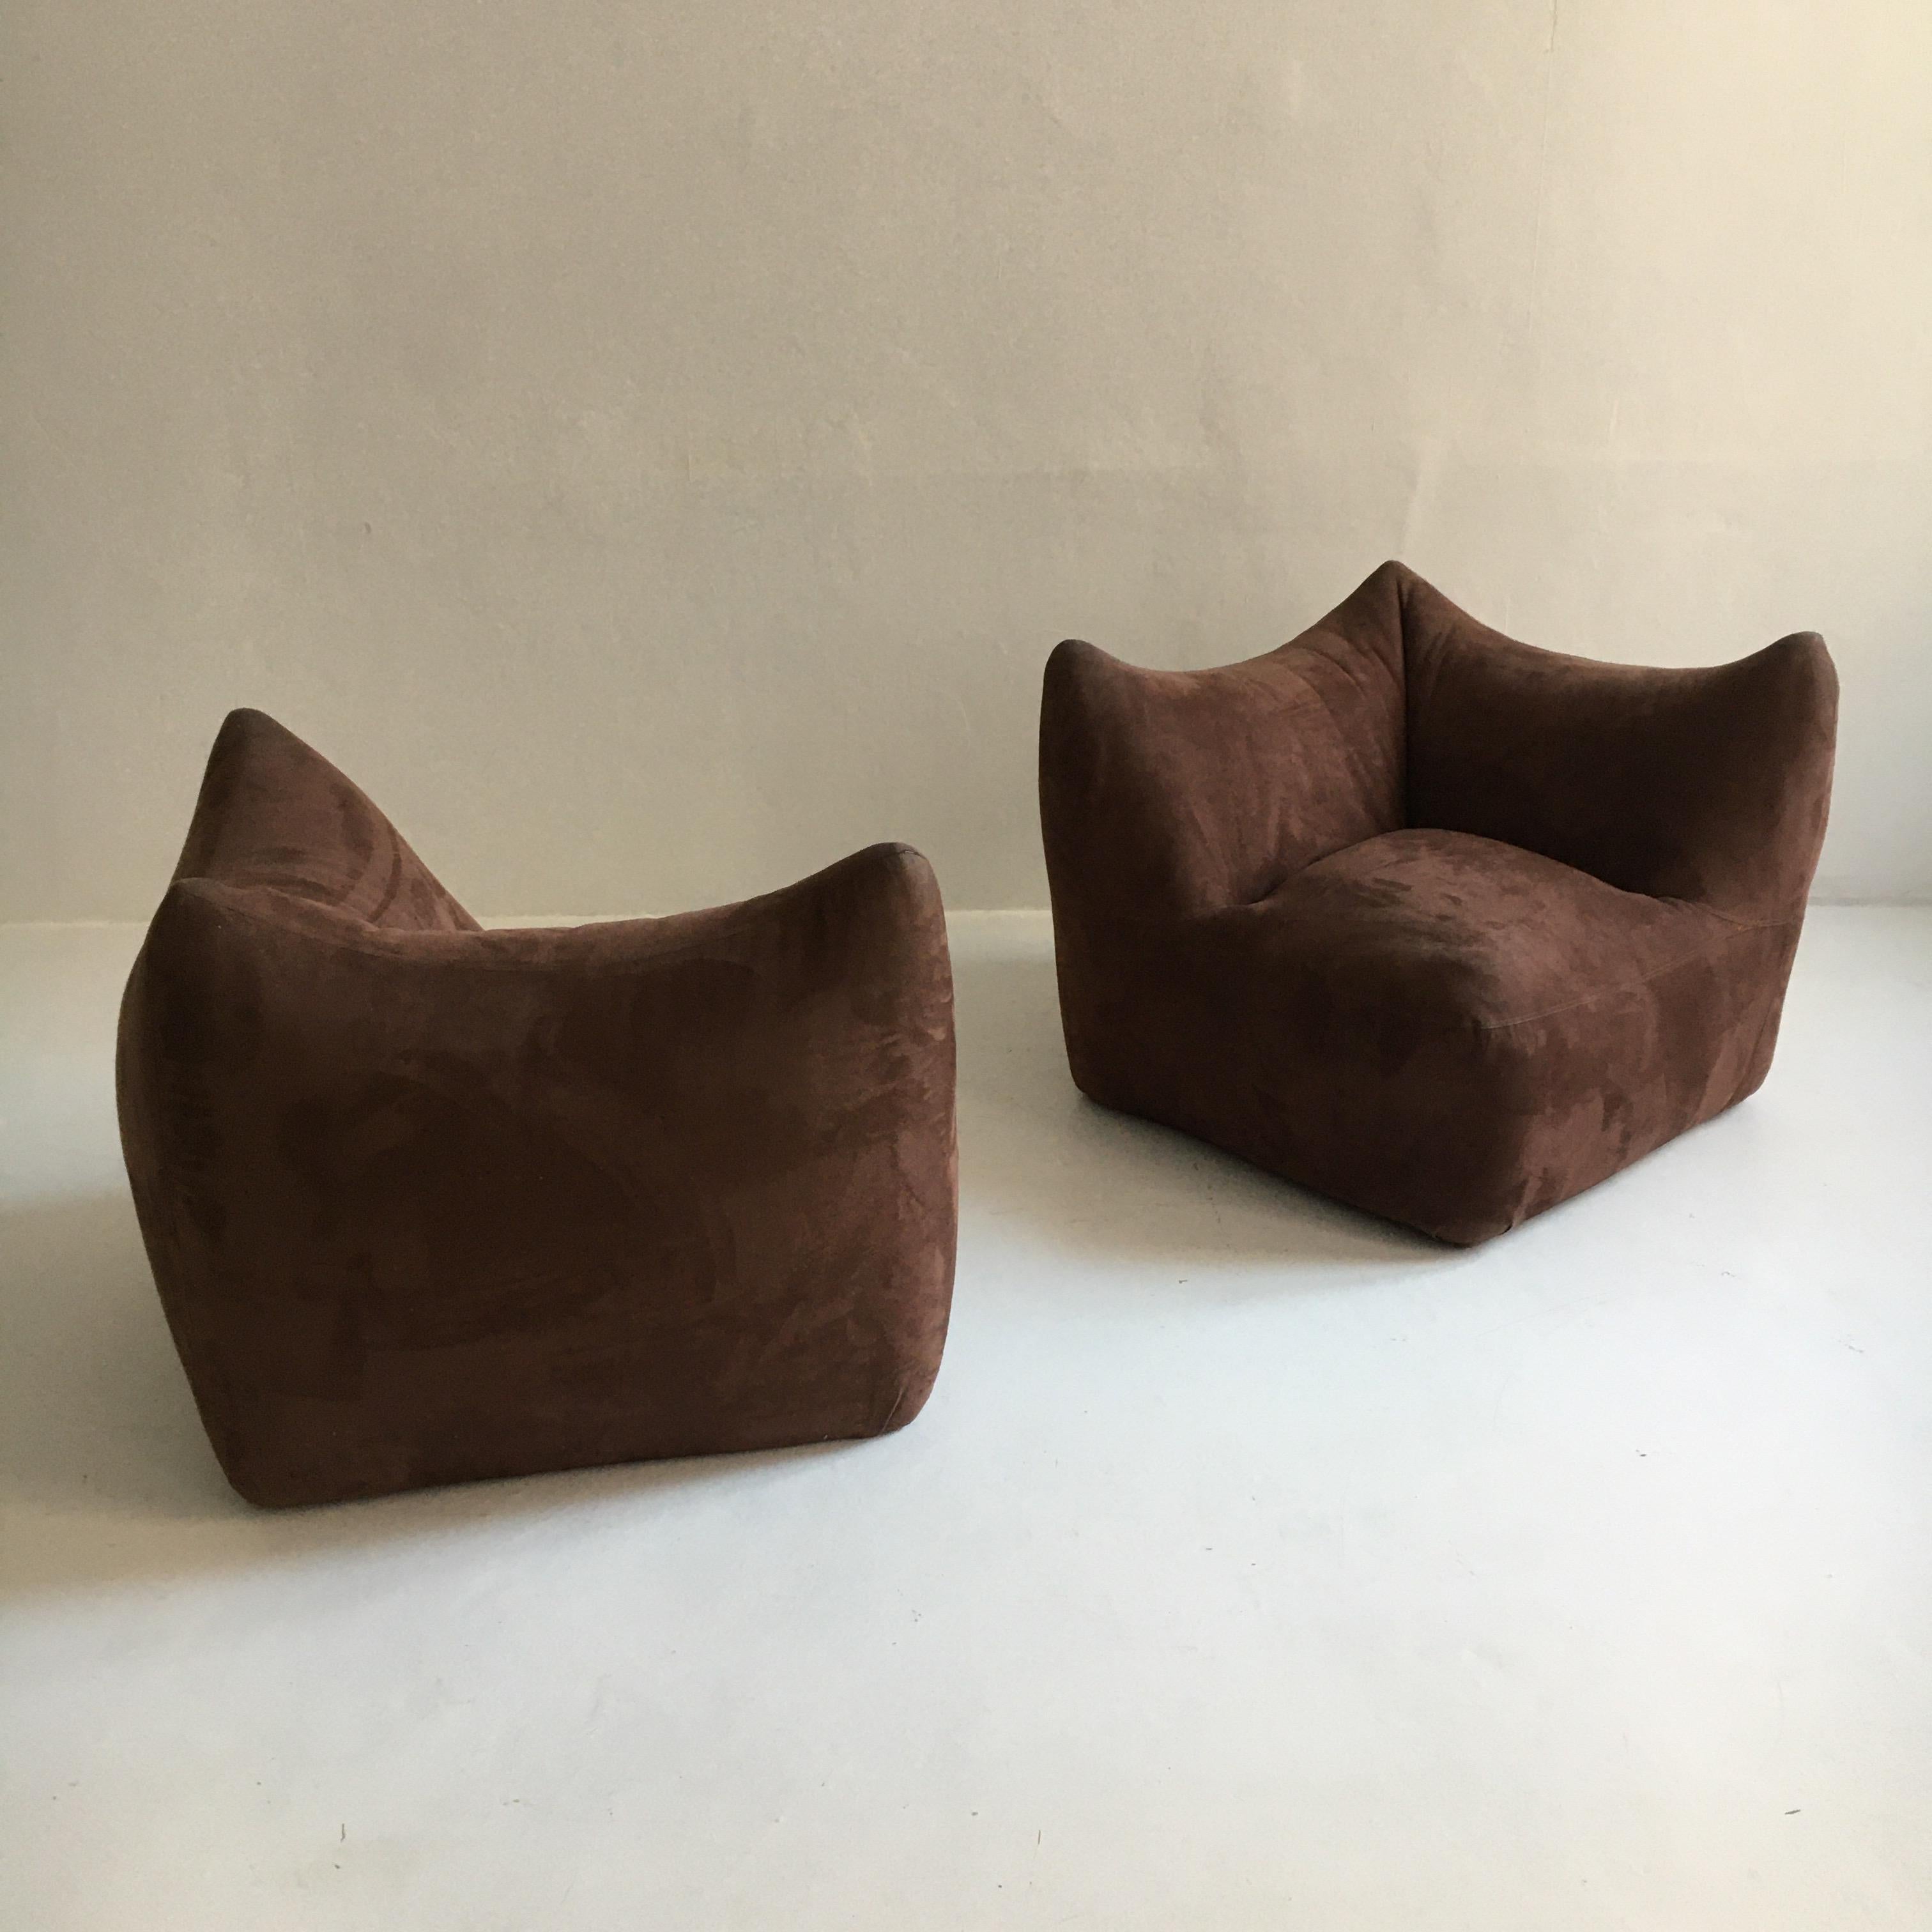 Mario Bellini 'Le Bambole' Two Modular Elements, Pair of Lounge Chairs, Italy 2